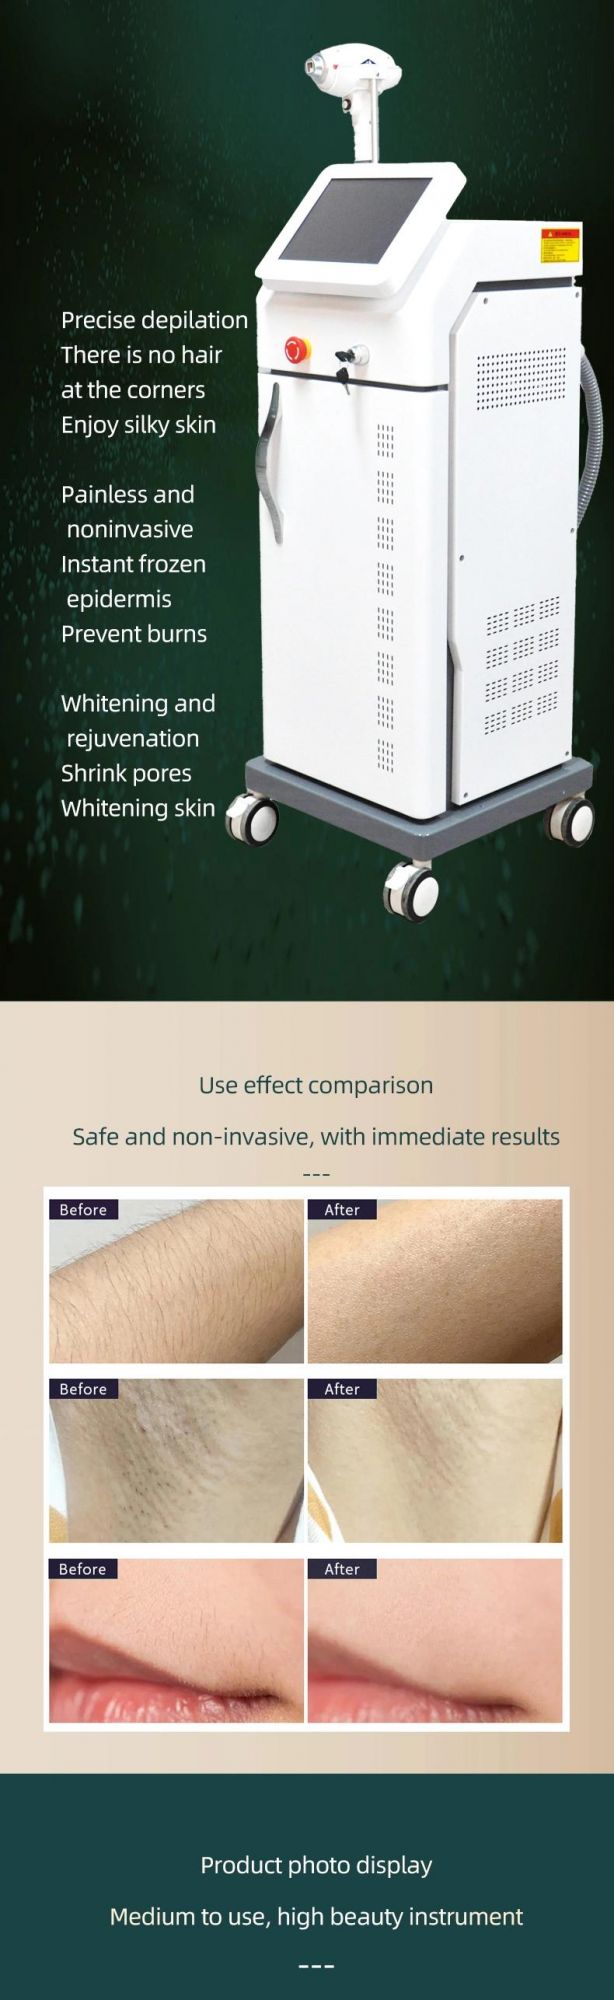 Pain Free New All Skin Types Hair Removal 755nm 808nm 1064nm Machine